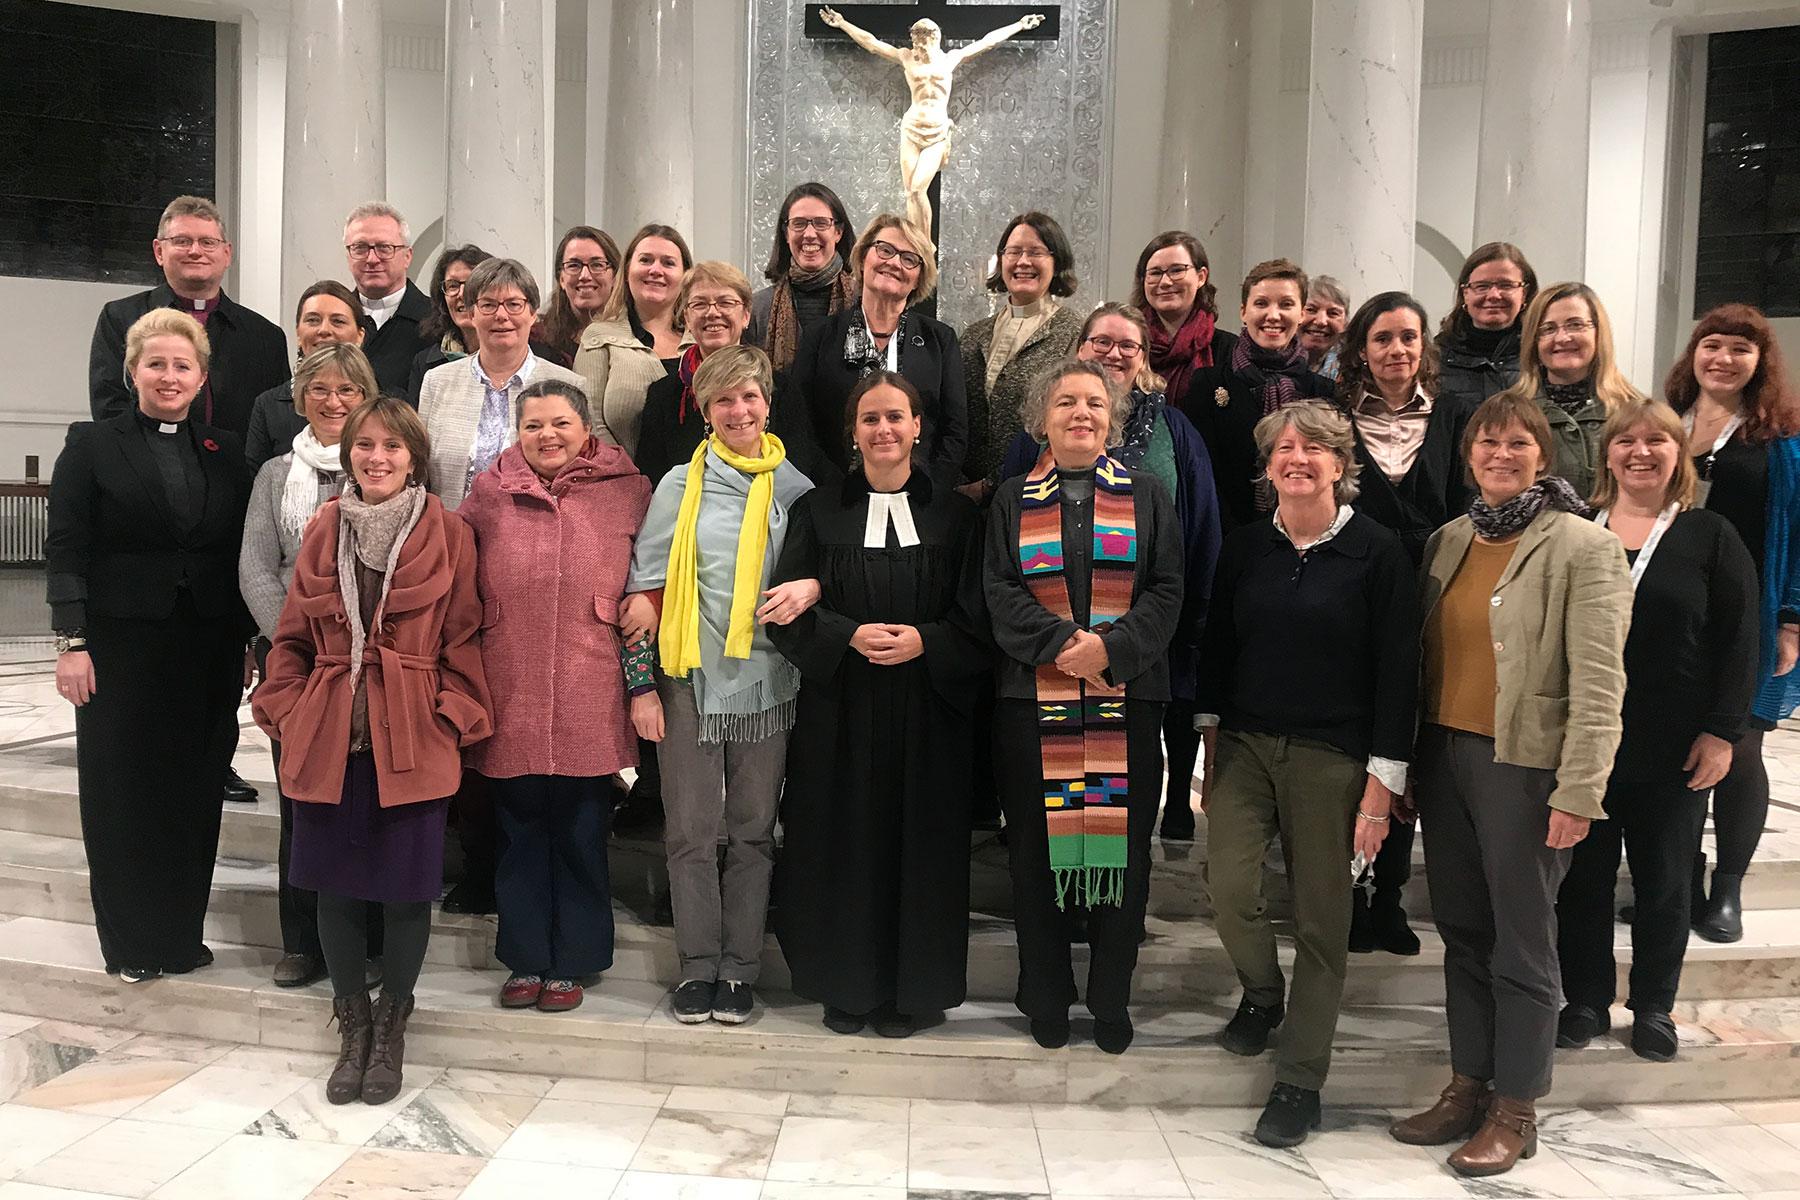 Women leaders from Eastern, Central and Western Europe participated in a Worship Service at Warsawâs Holy Trinity Lutheran church during a regional consultation on âFaith, Gender Justice and Womenâs Human Rightsâ. Photo: LWF/Agnieszka GodfrejÃ³w-TarnagÃ³rska